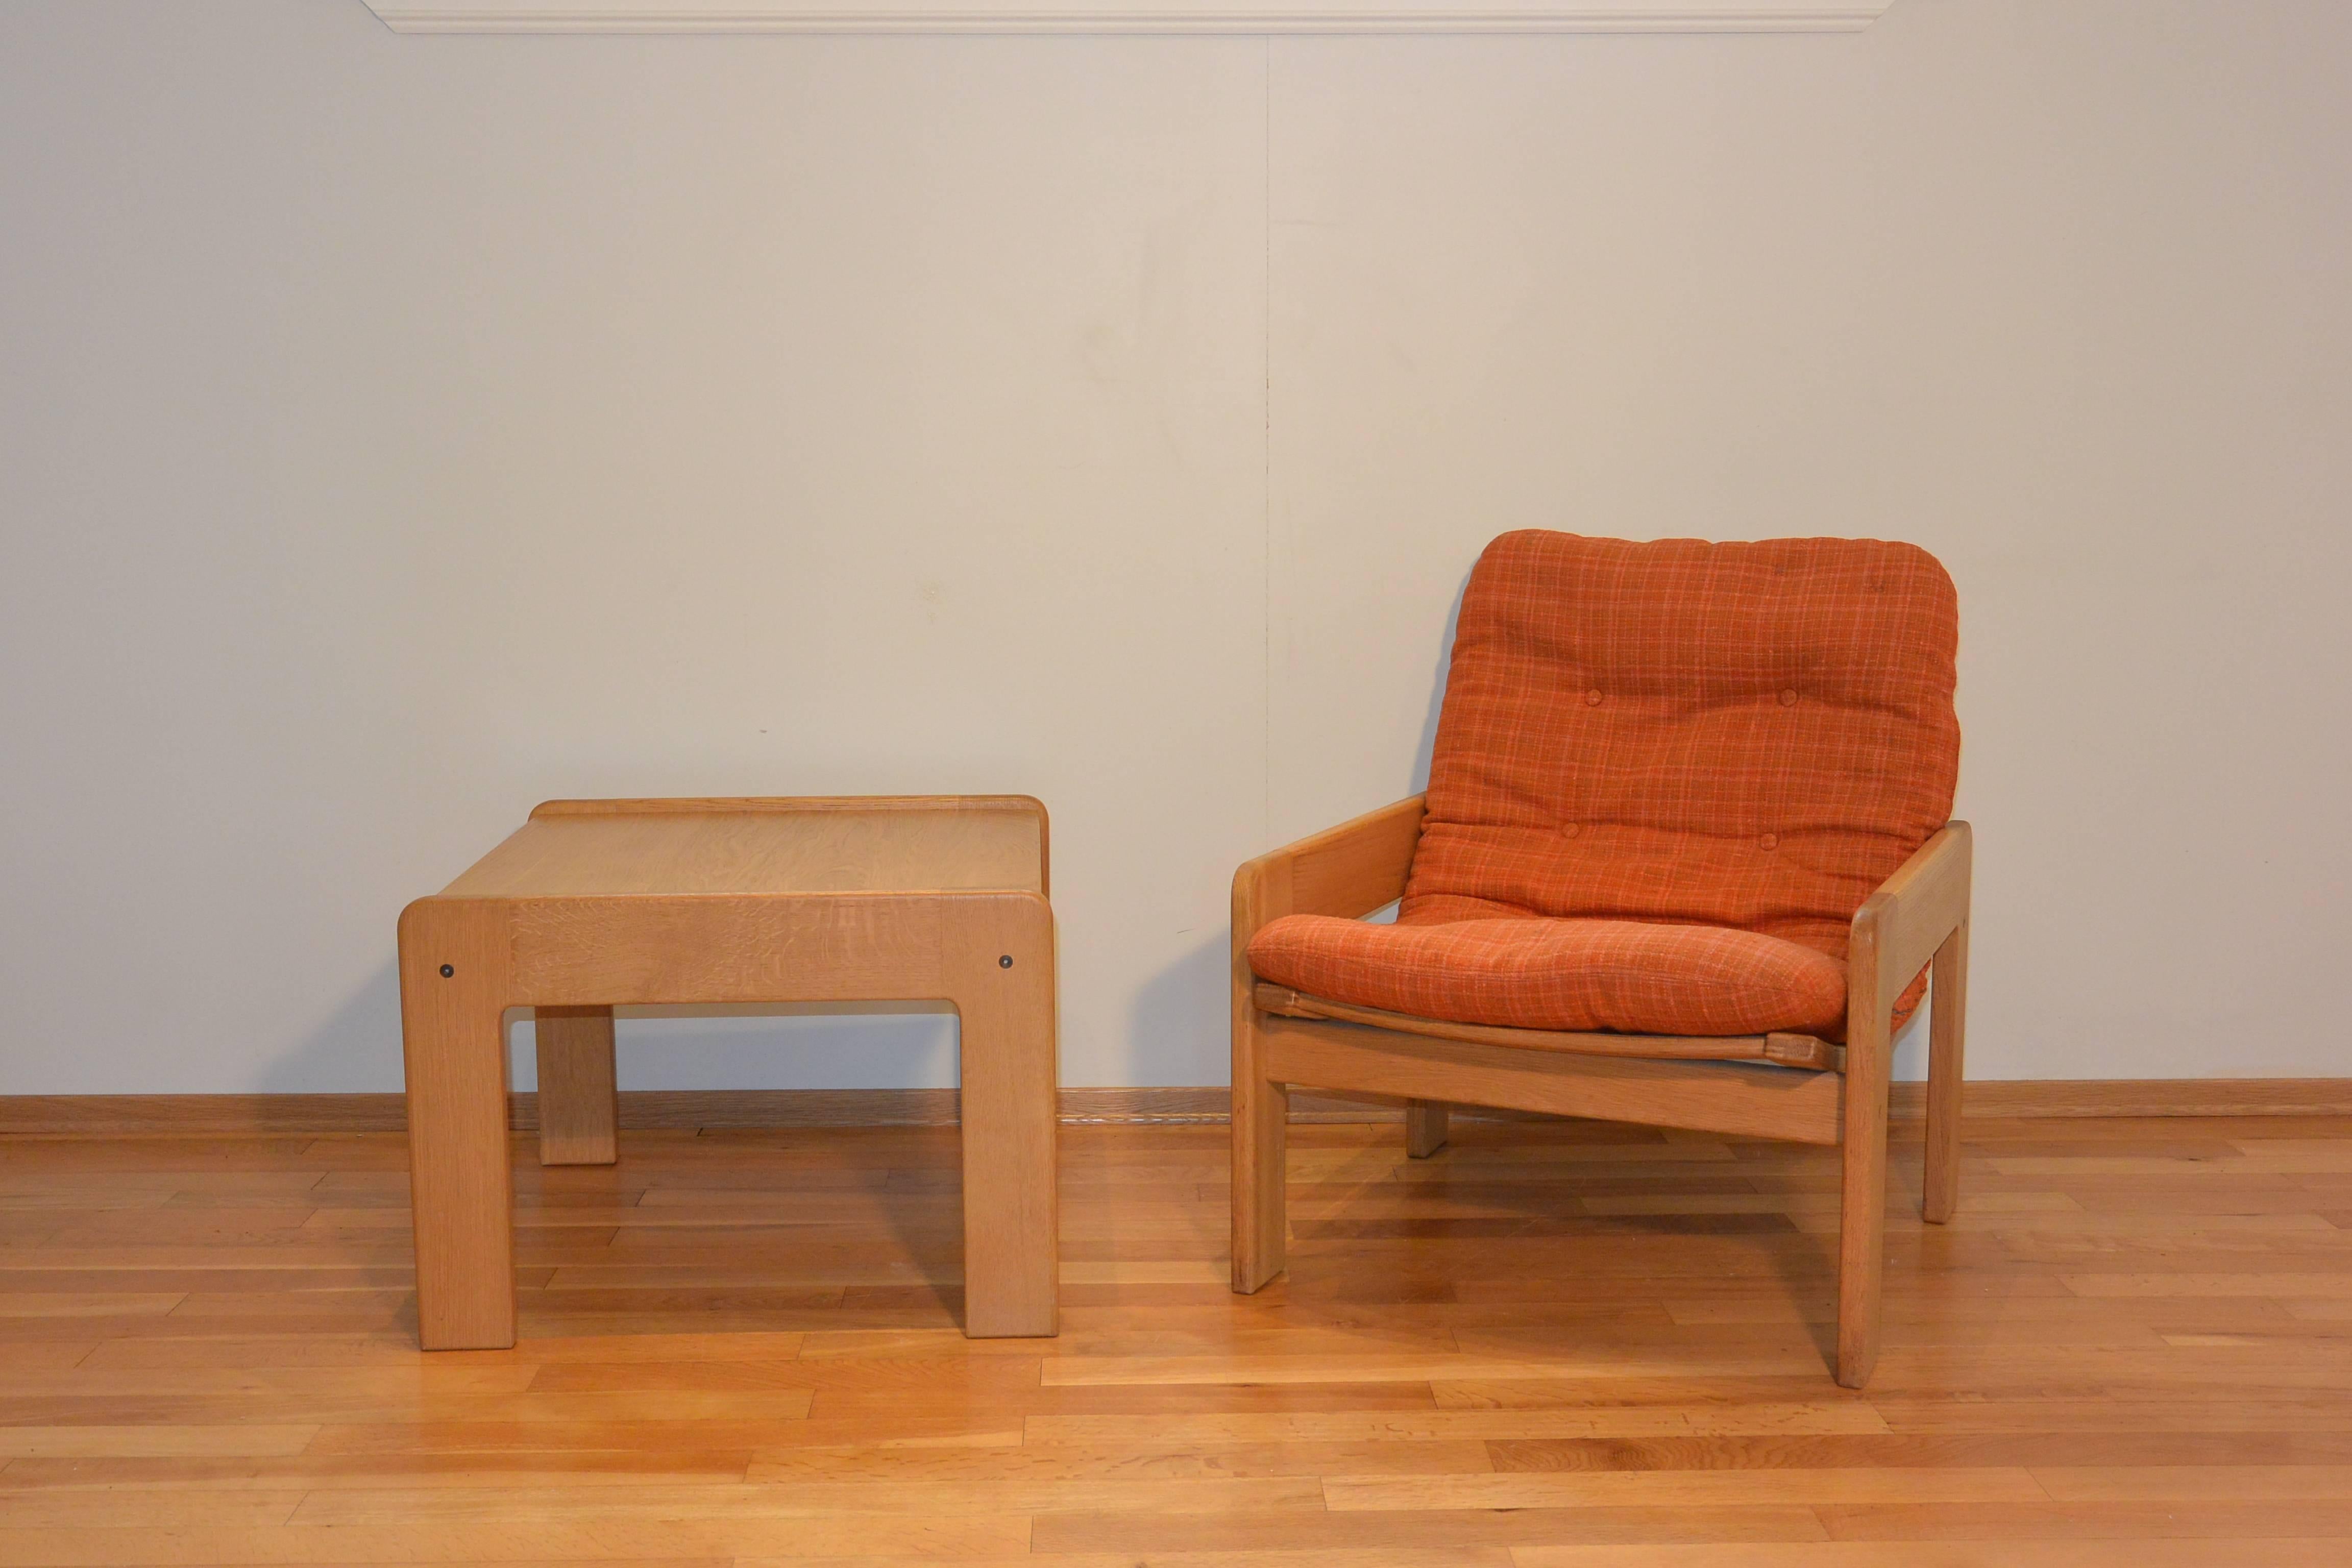 Light oak Swedish chair and table pair by designer Yngve Ekström for Swedese, early 1970s. The price offered is for the chair and table featured.

Modern geometric or cubic shape with bright orange and red upholstered cushion makes a bold statement.